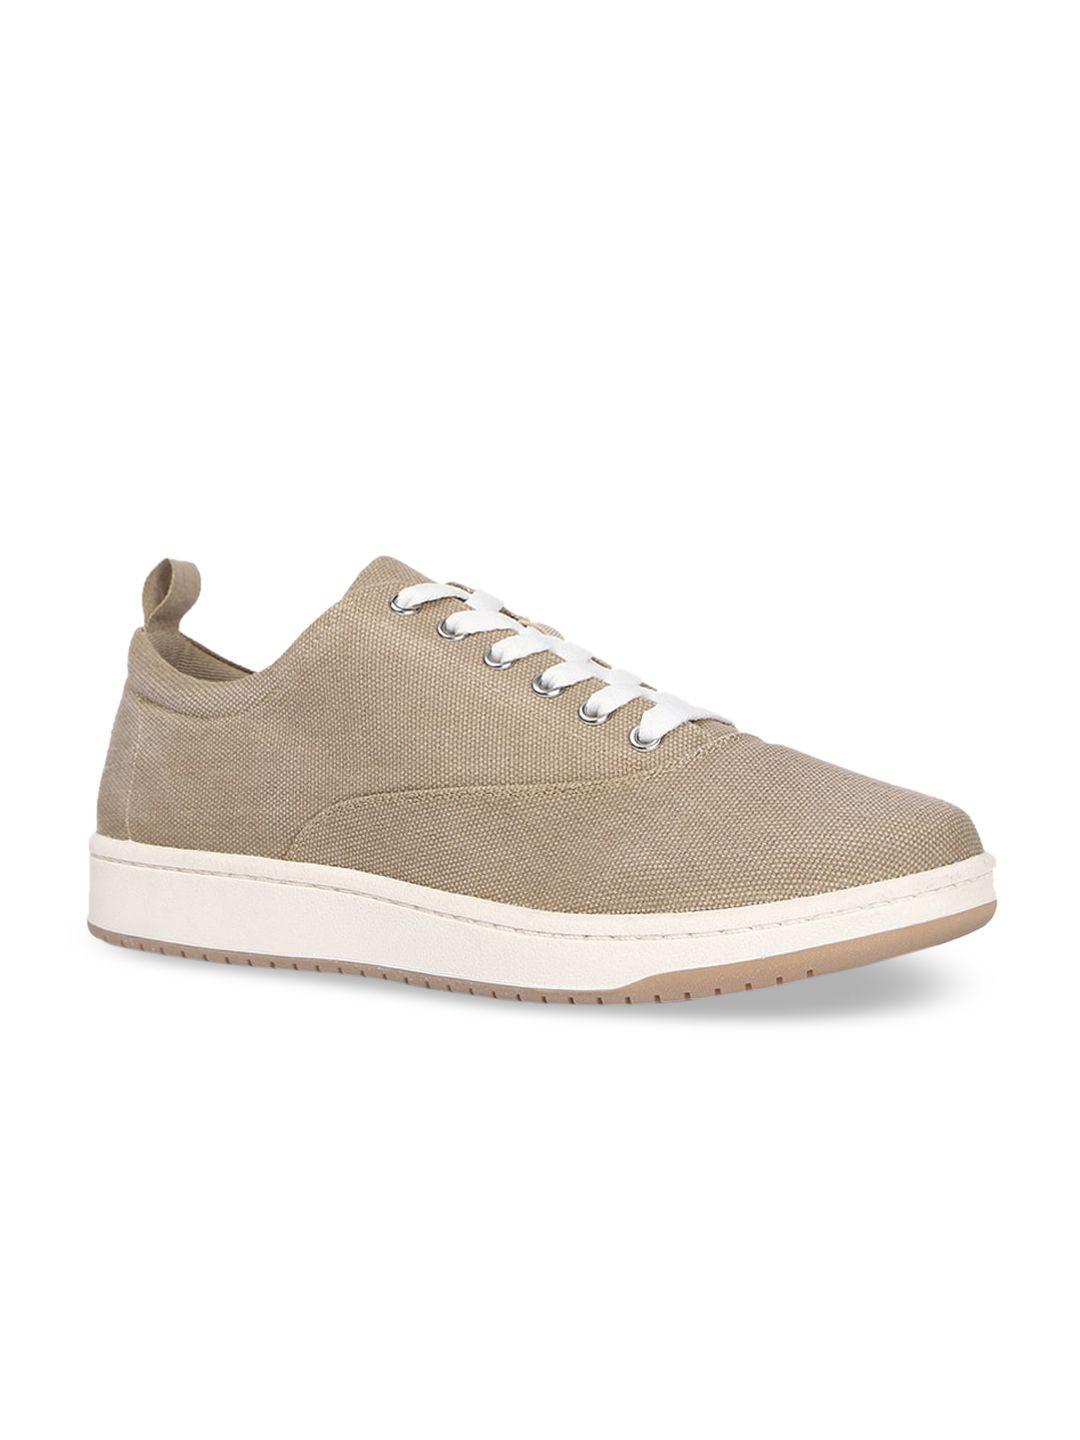 forever-21-men-textured-pu-sneakers-casual-shoes